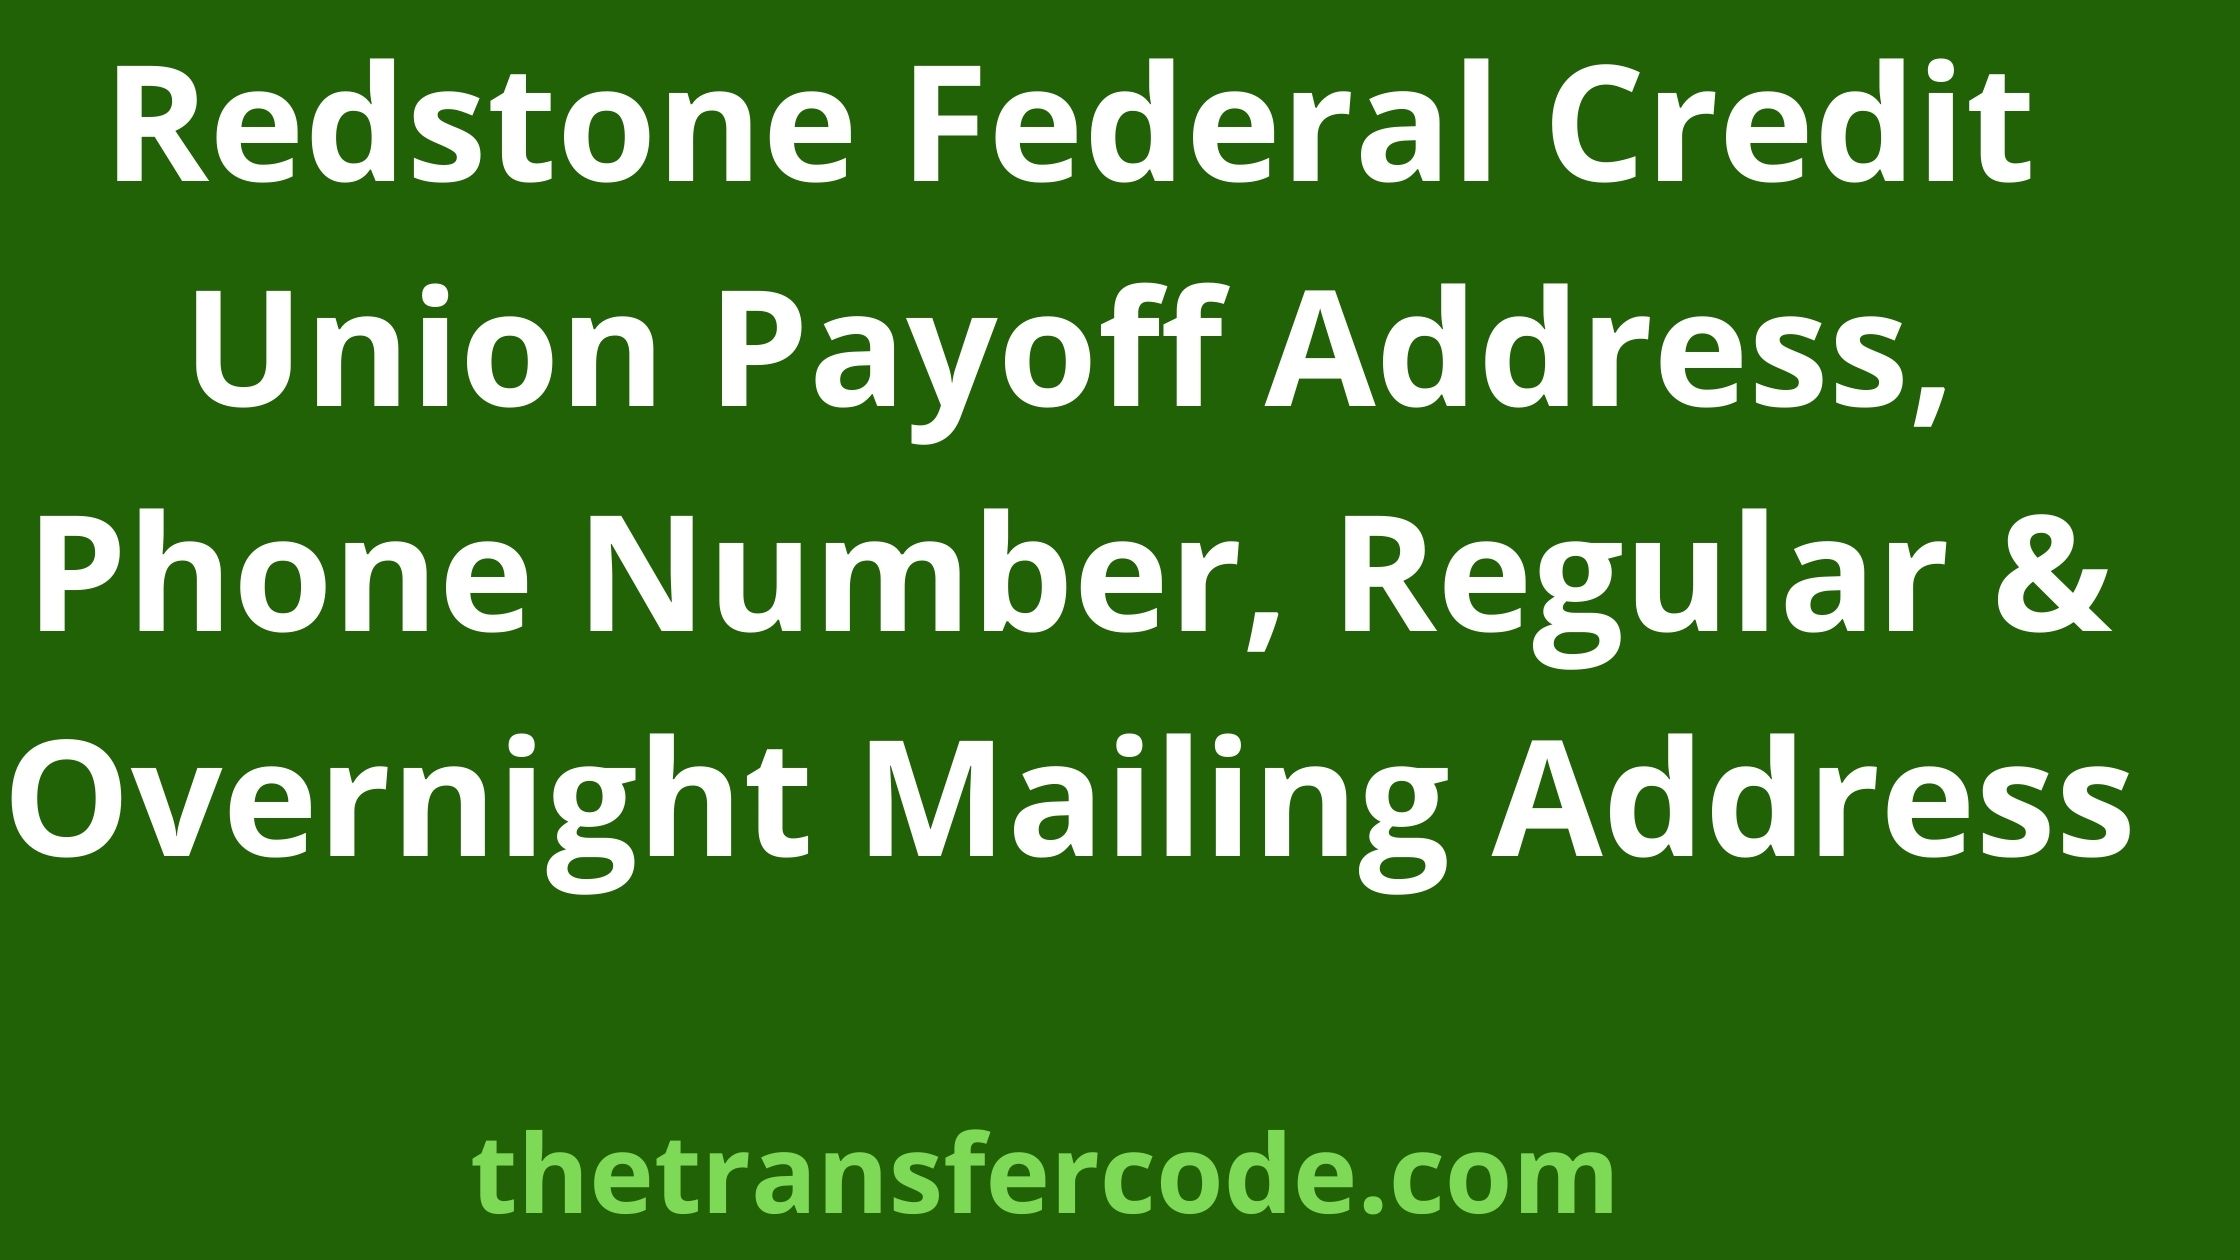 Redstone Federal Credit Union Payoff Address Phone Number 